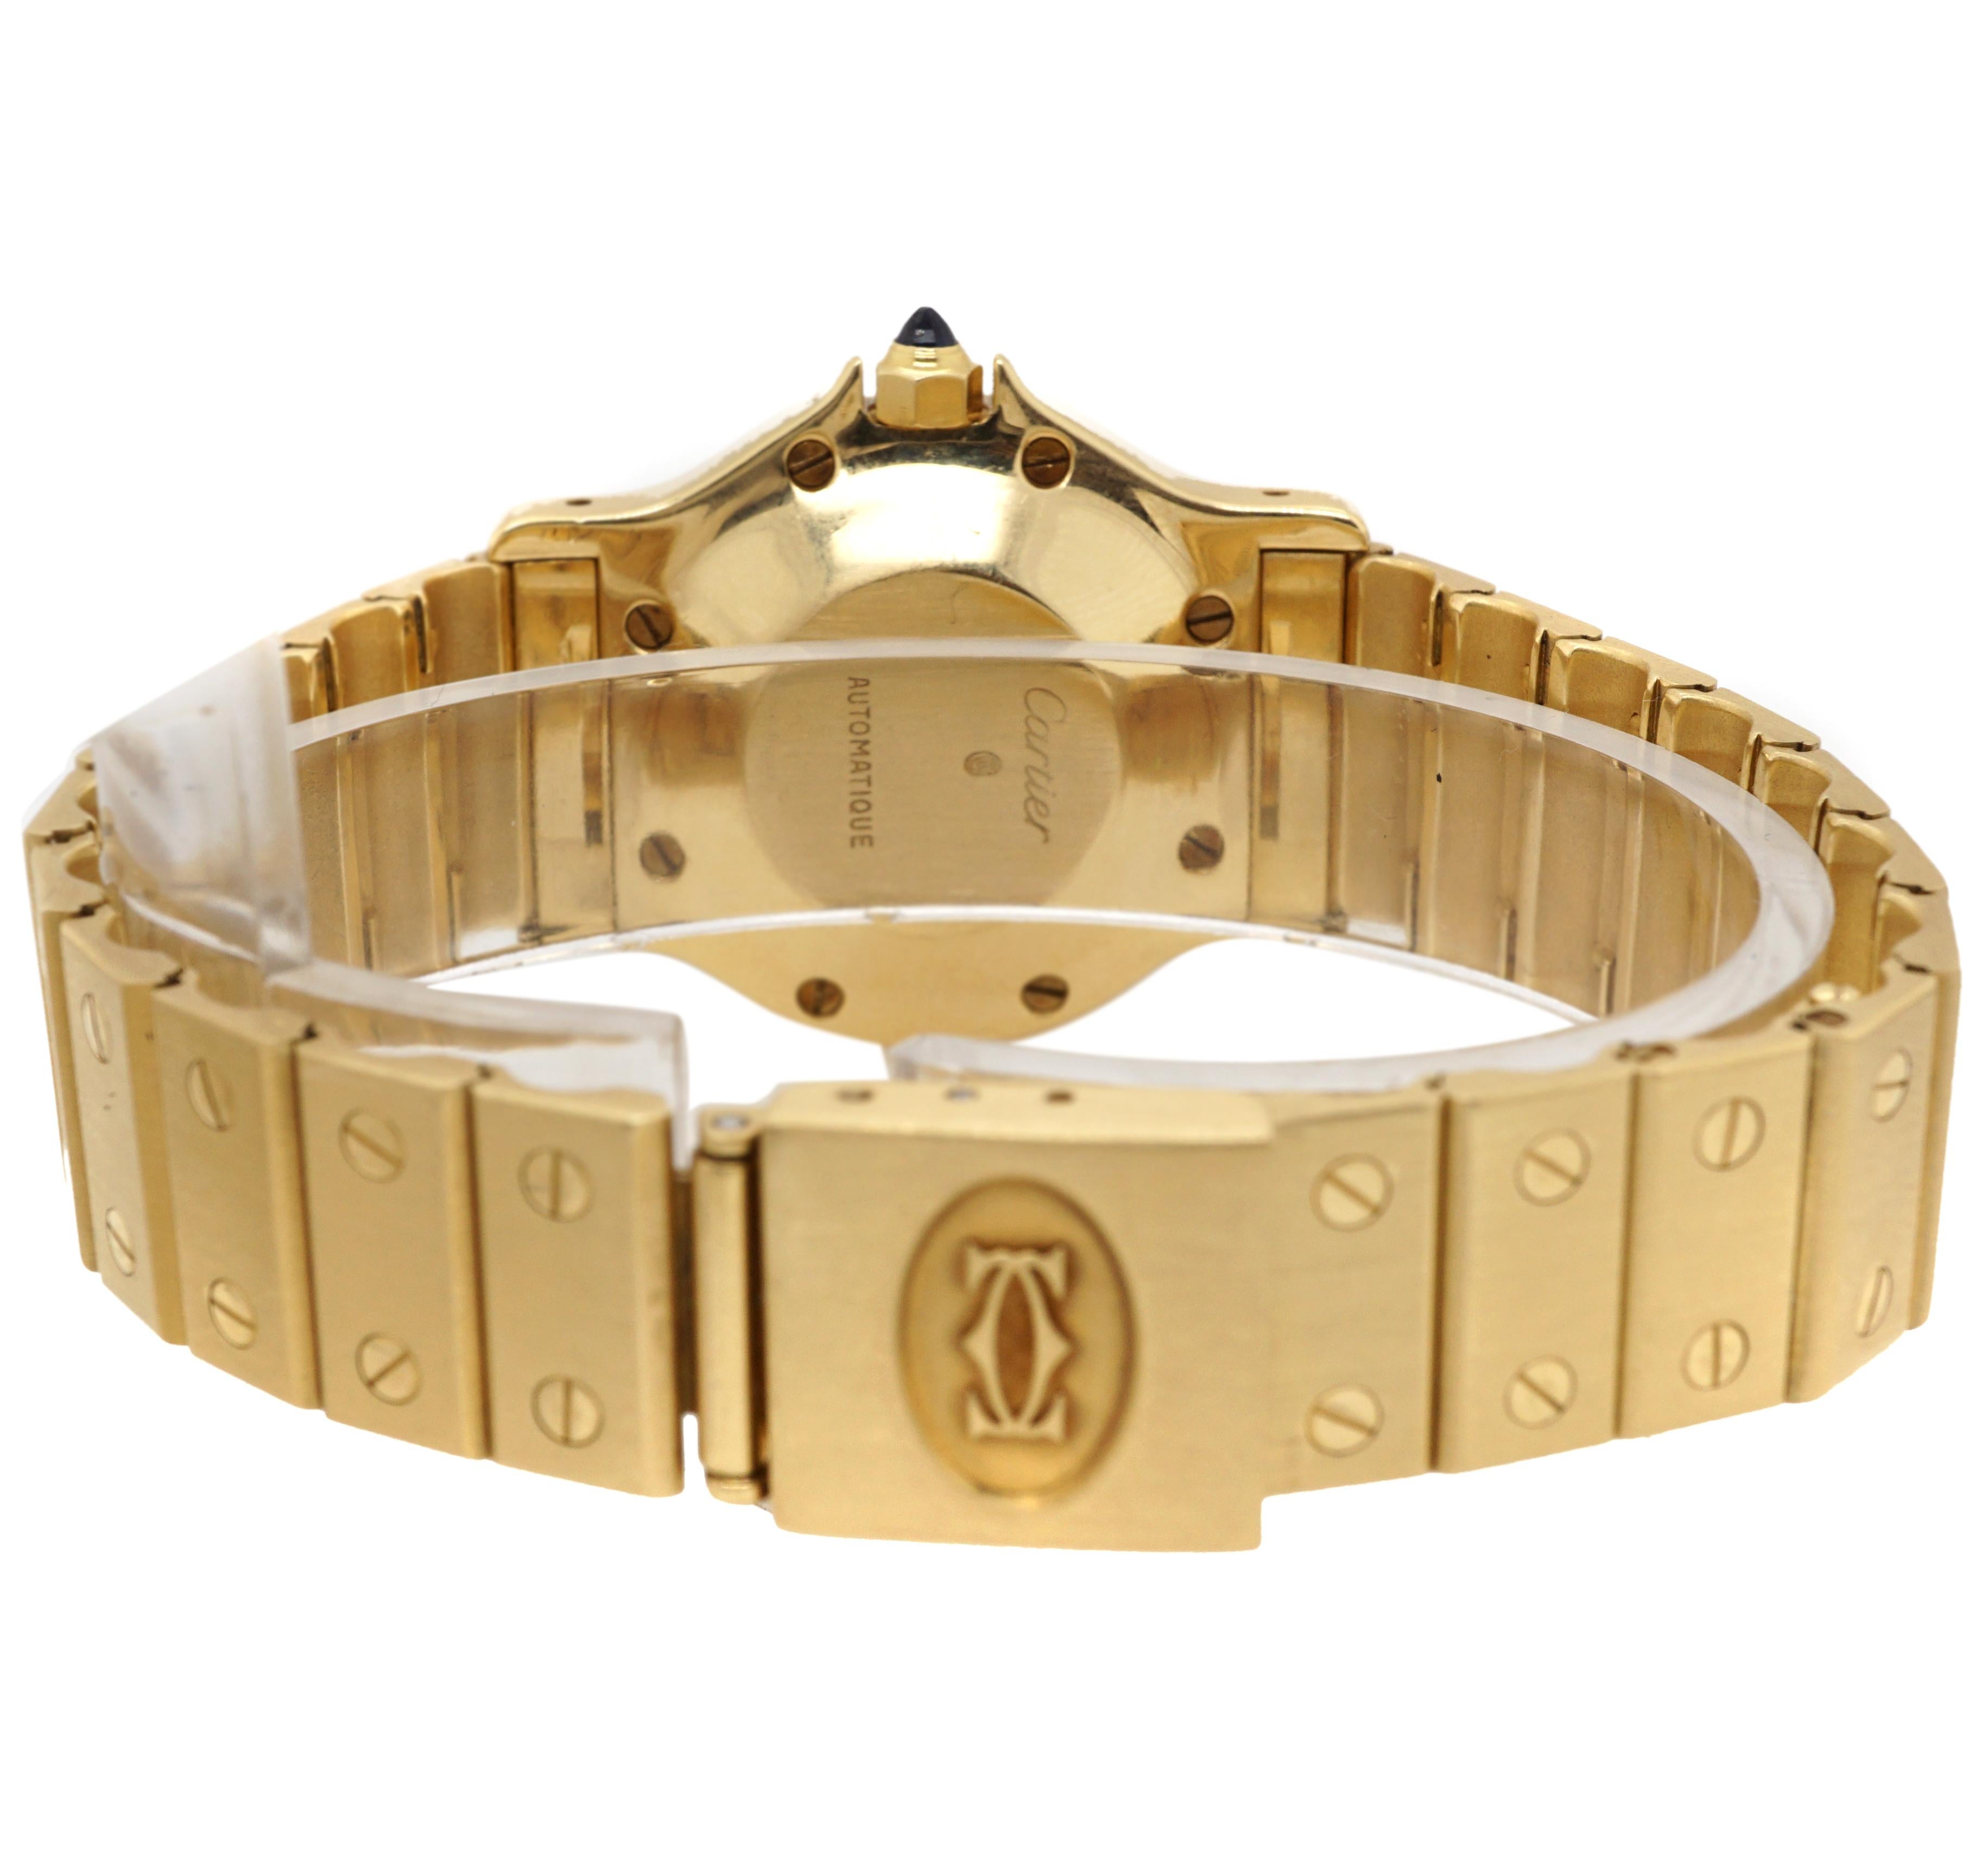 Cartier Santos Octagon 18K Yellow Gold Automatic Women's Watch
Cartier Santos Octagon Solid 18KT Yellow Gold, White dial with black Roman numerals, Blue hands, Crown set with dark sapphire embedded.

Dial: White, Black Roman Numerals with Date